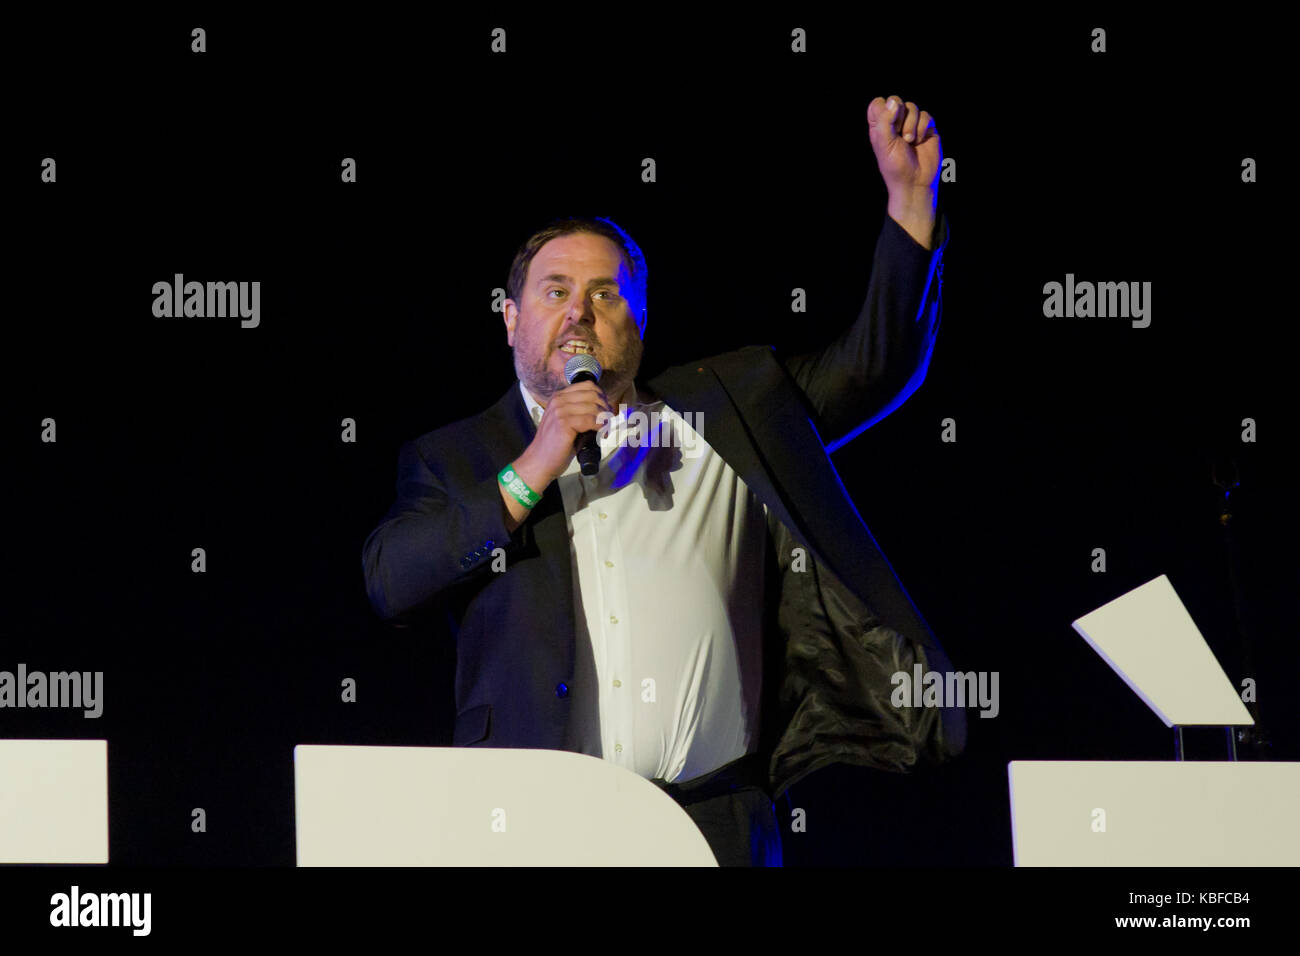 Barcelona, Spain. 29th Sep, 2017.  Catalonia's vice-president Oriol Junqueras speaks during the closing campaign meeting for the YES in Barcelona. Next sunday Catalan government aims to held a referendum on independence, the Spanish government is frontally opposed to the referendum and consider it illegal. Thousands of Spanish police officers have been transferred to the Catalan region to ban the referendum. Credit: Jordi Boixareu/Alamy Live News Stock Photo